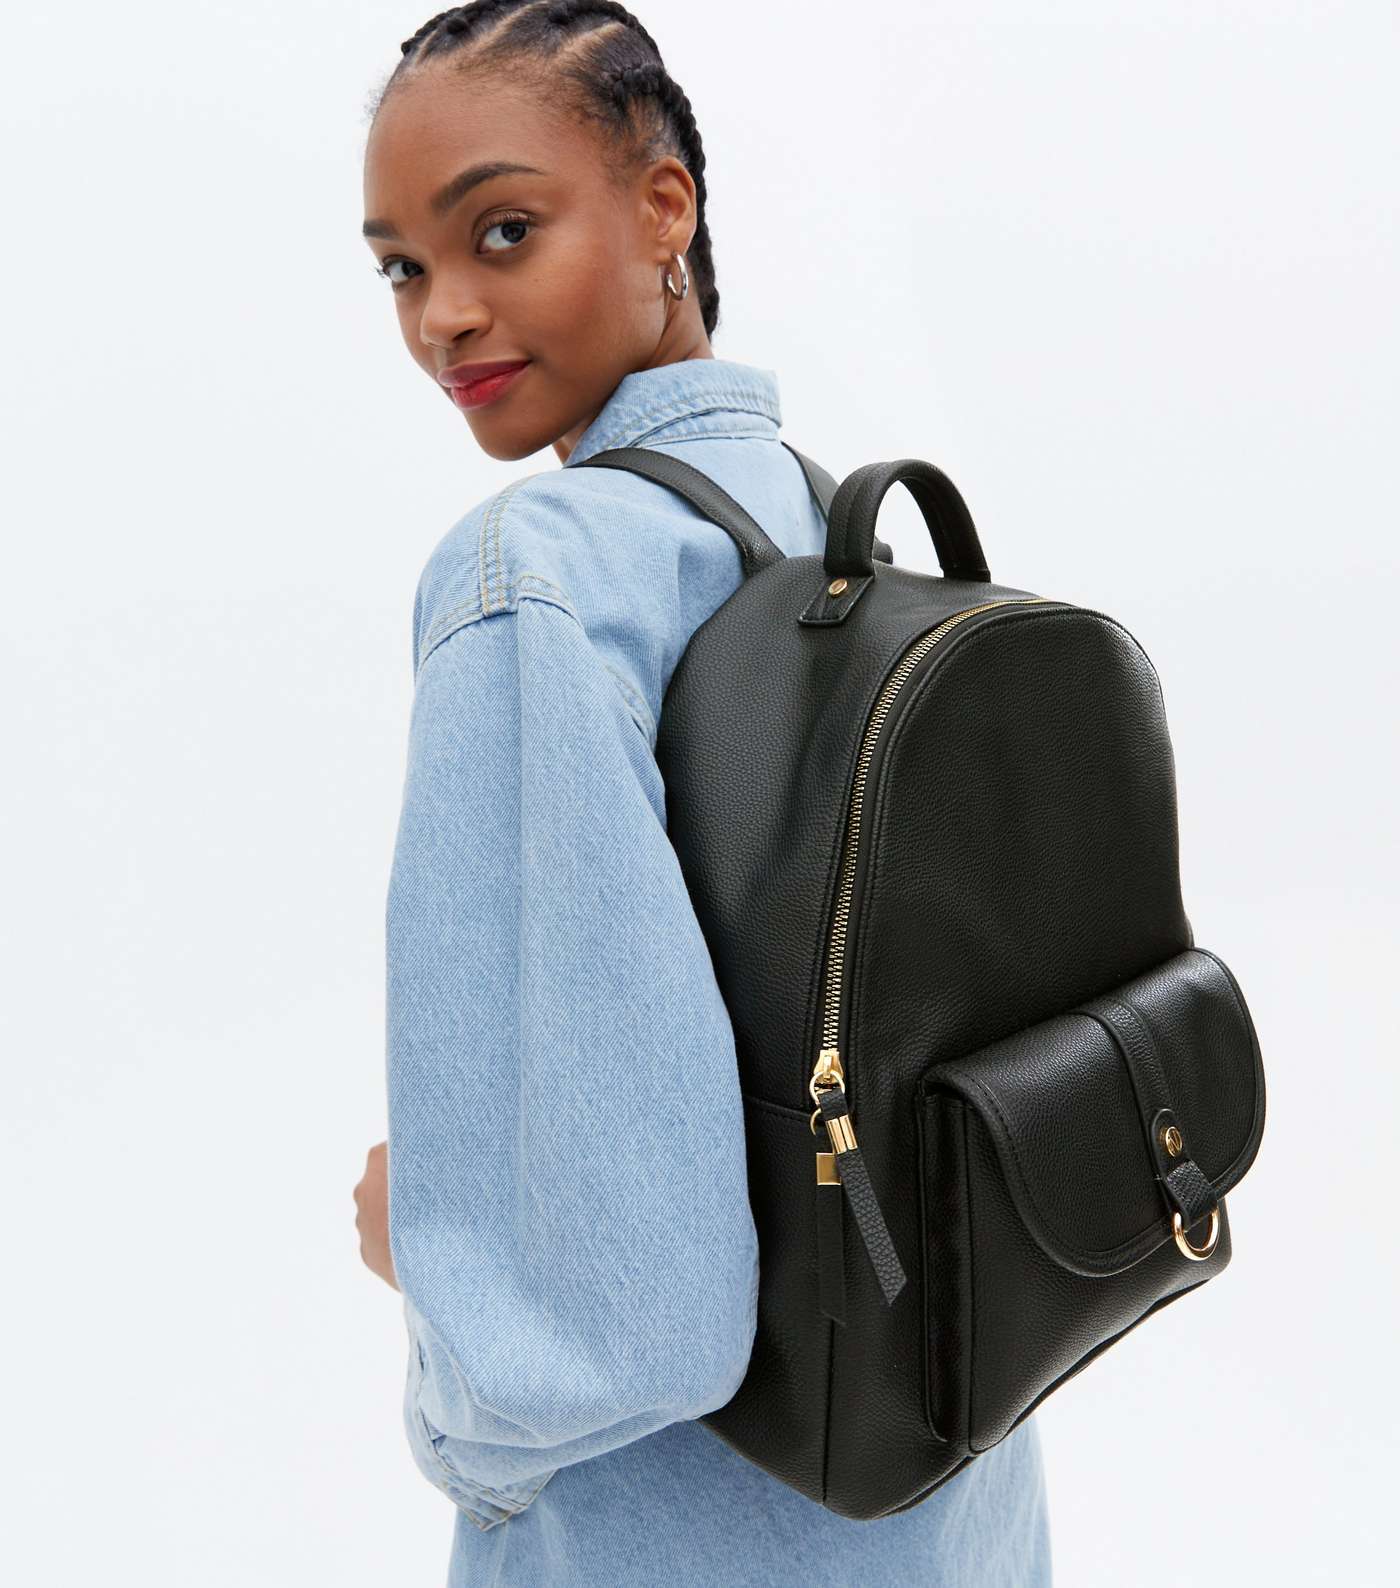 Black Leather-Look Ring Front Backpack Image 2